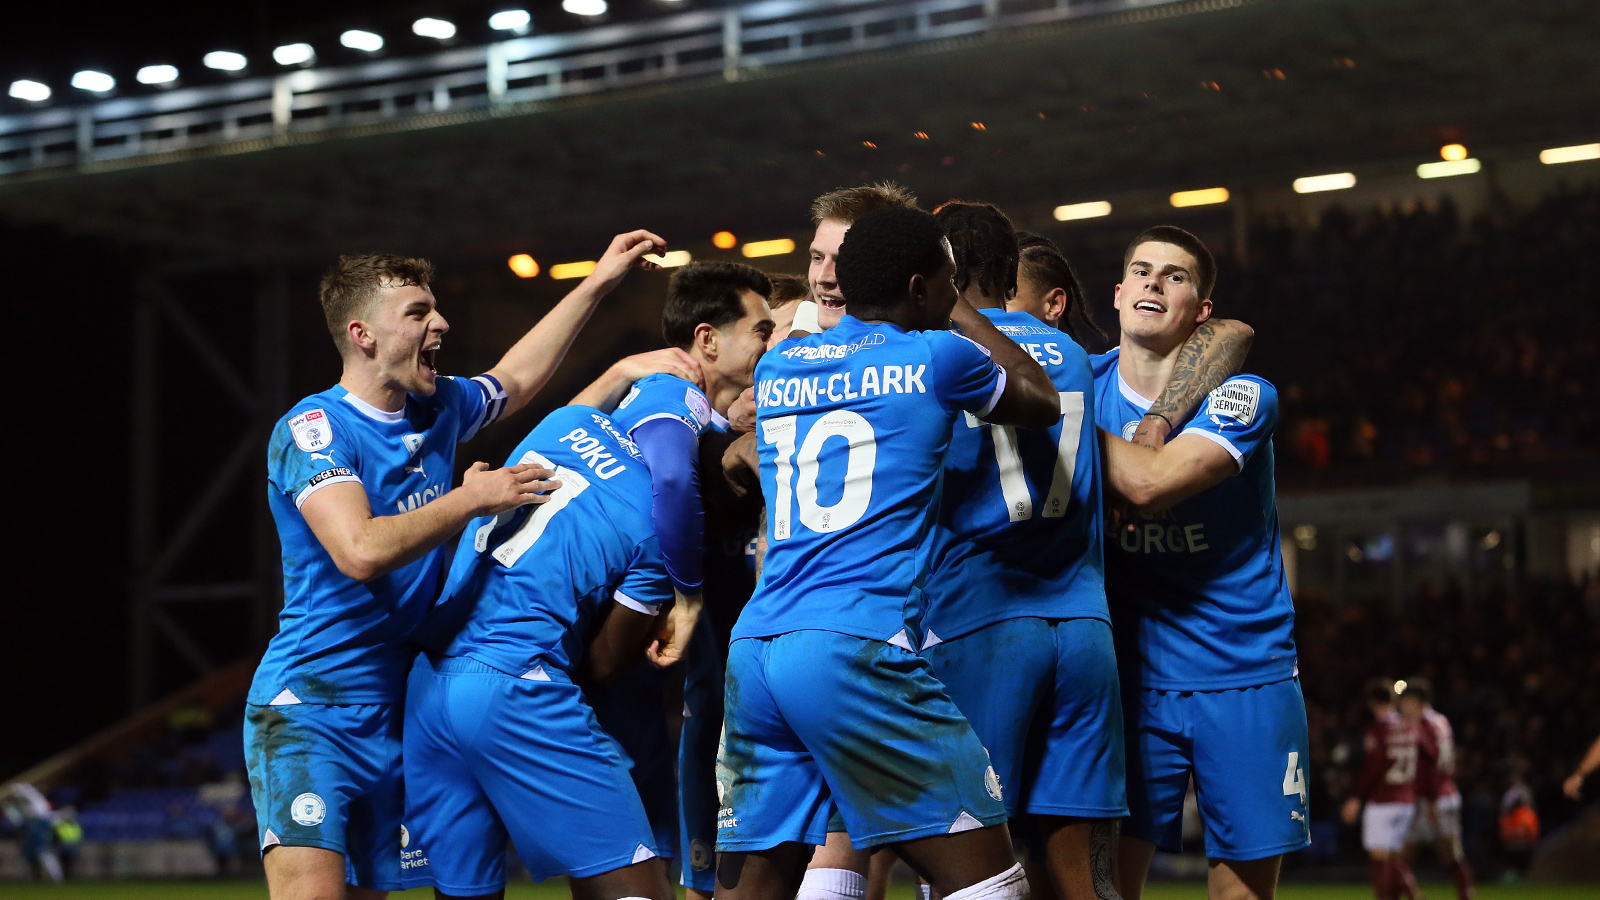 Posh players celebrate during the 5-1 win over Northampton Town